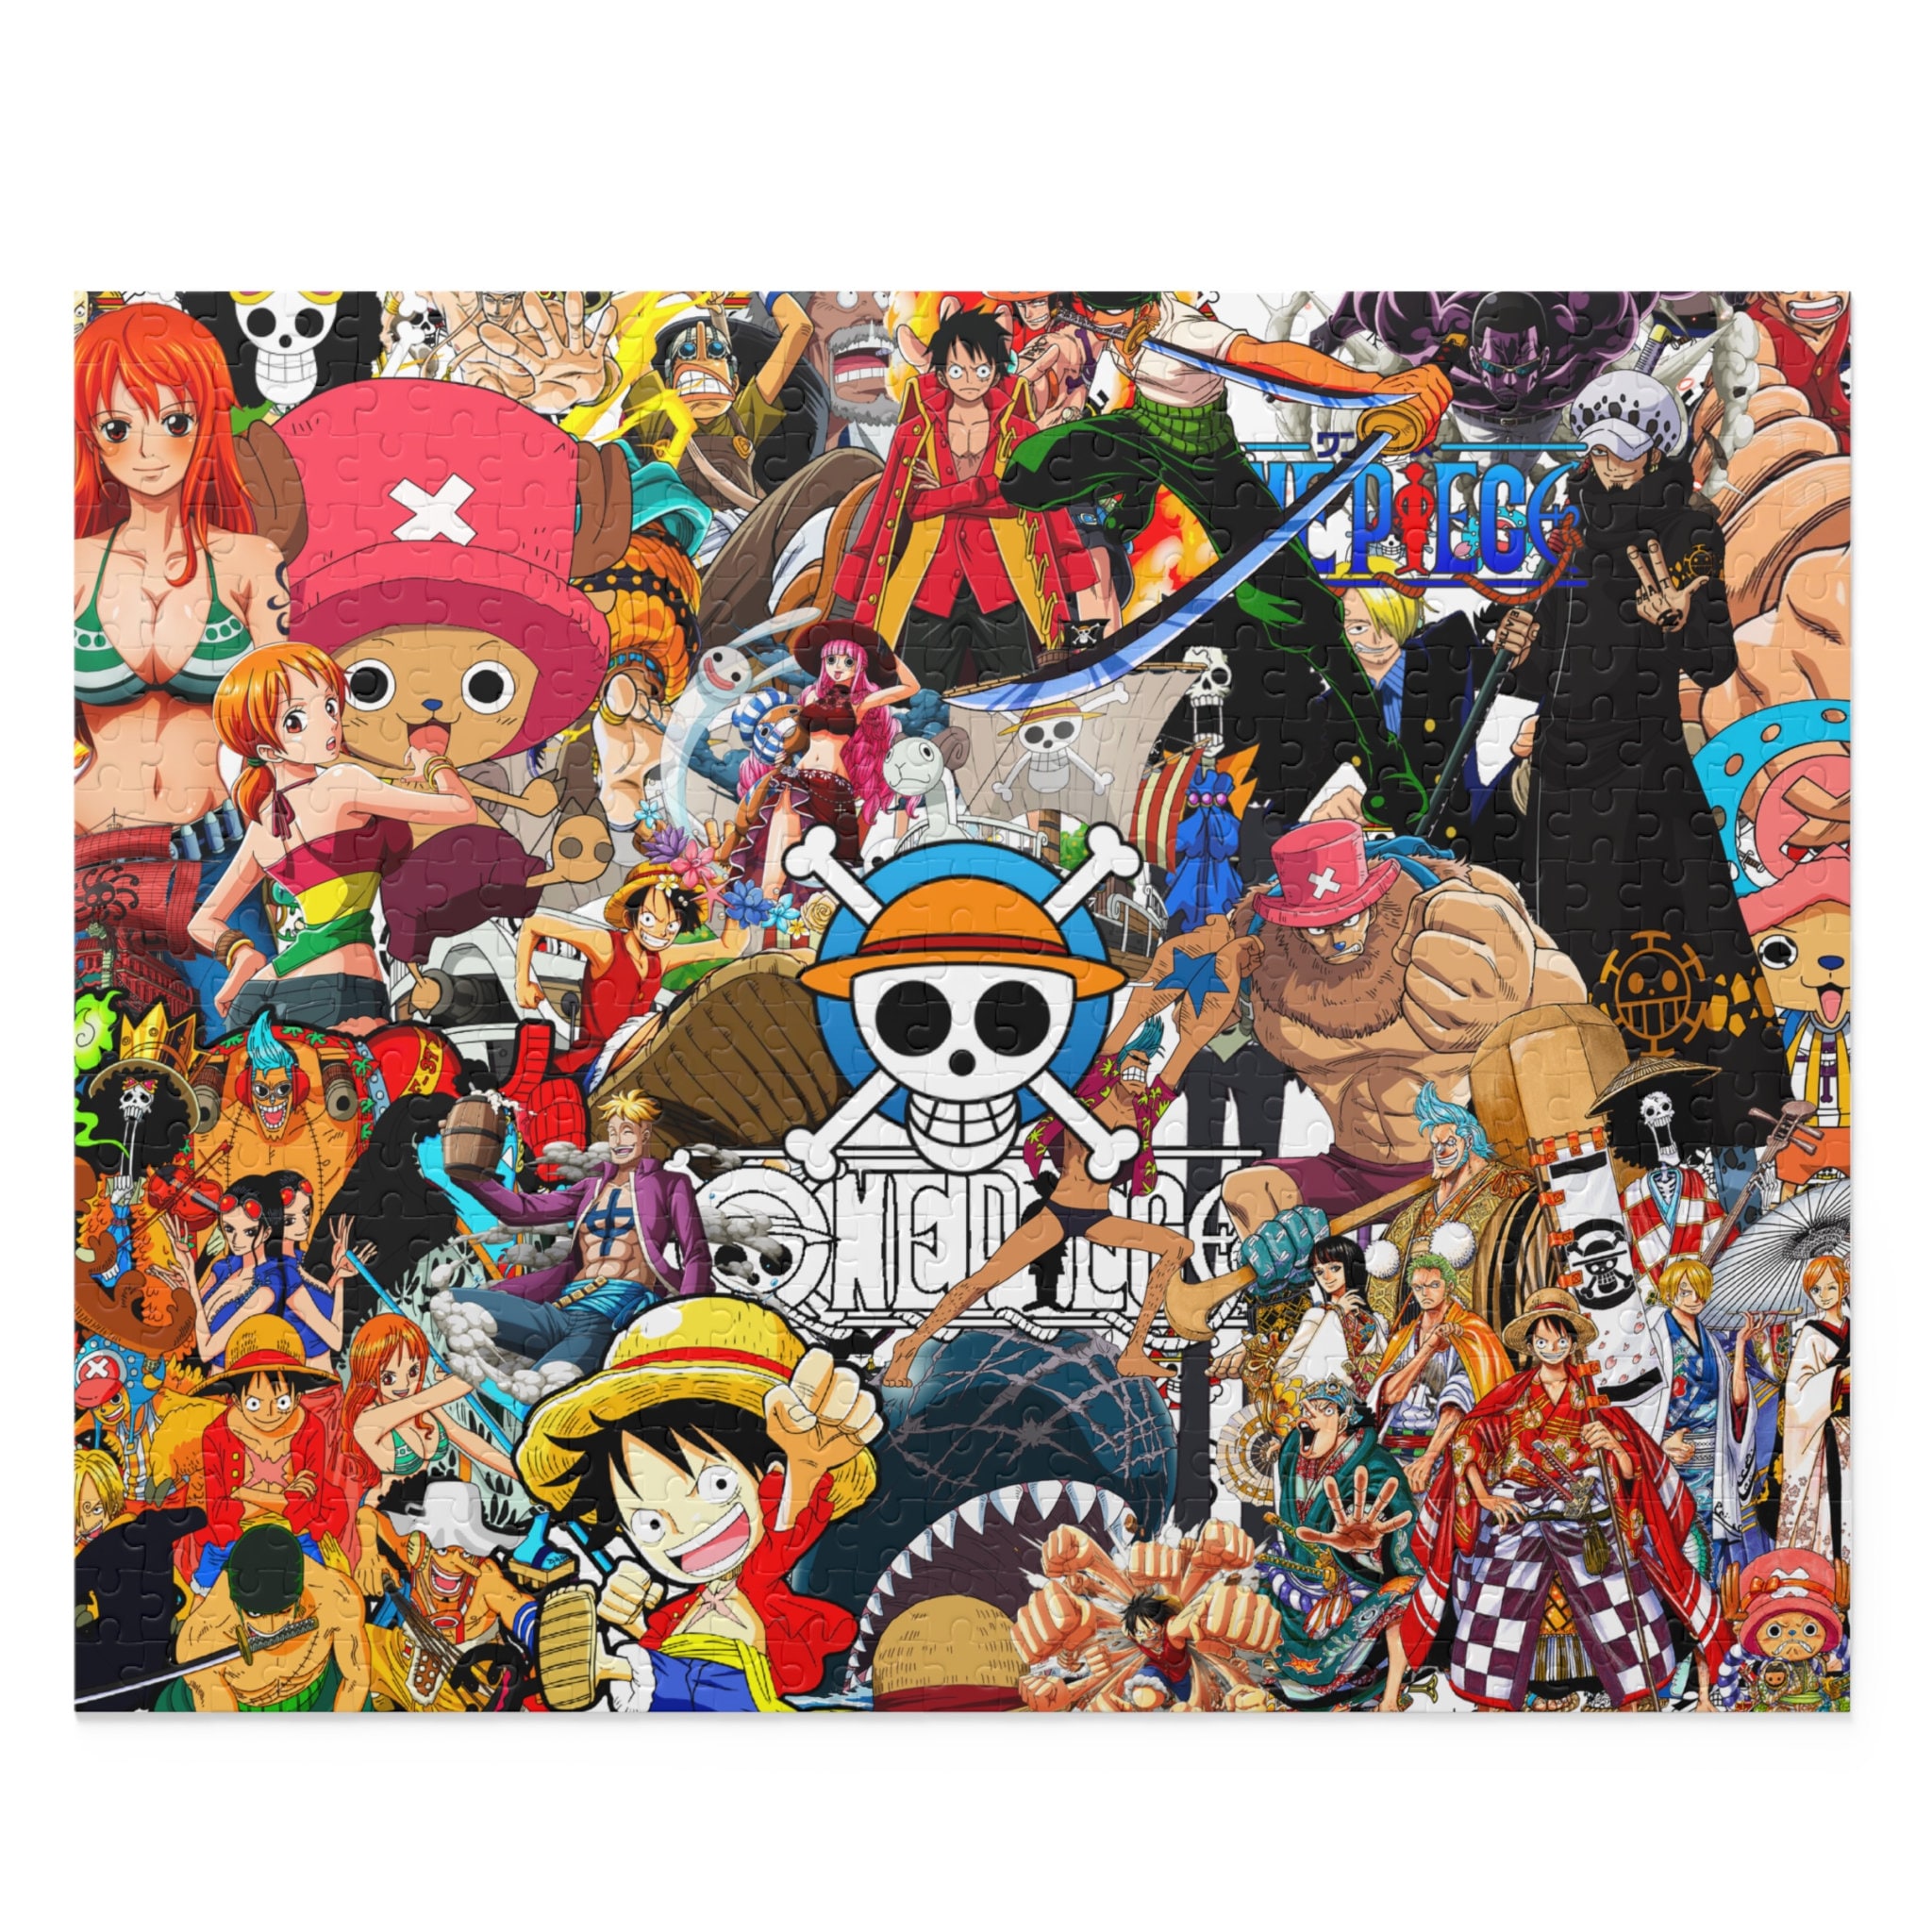 One piece puzzle 500 piece puzzle anime gift one piece collage gift anime  gift for him Christmas gift ideas anime puzzle custom puzzle